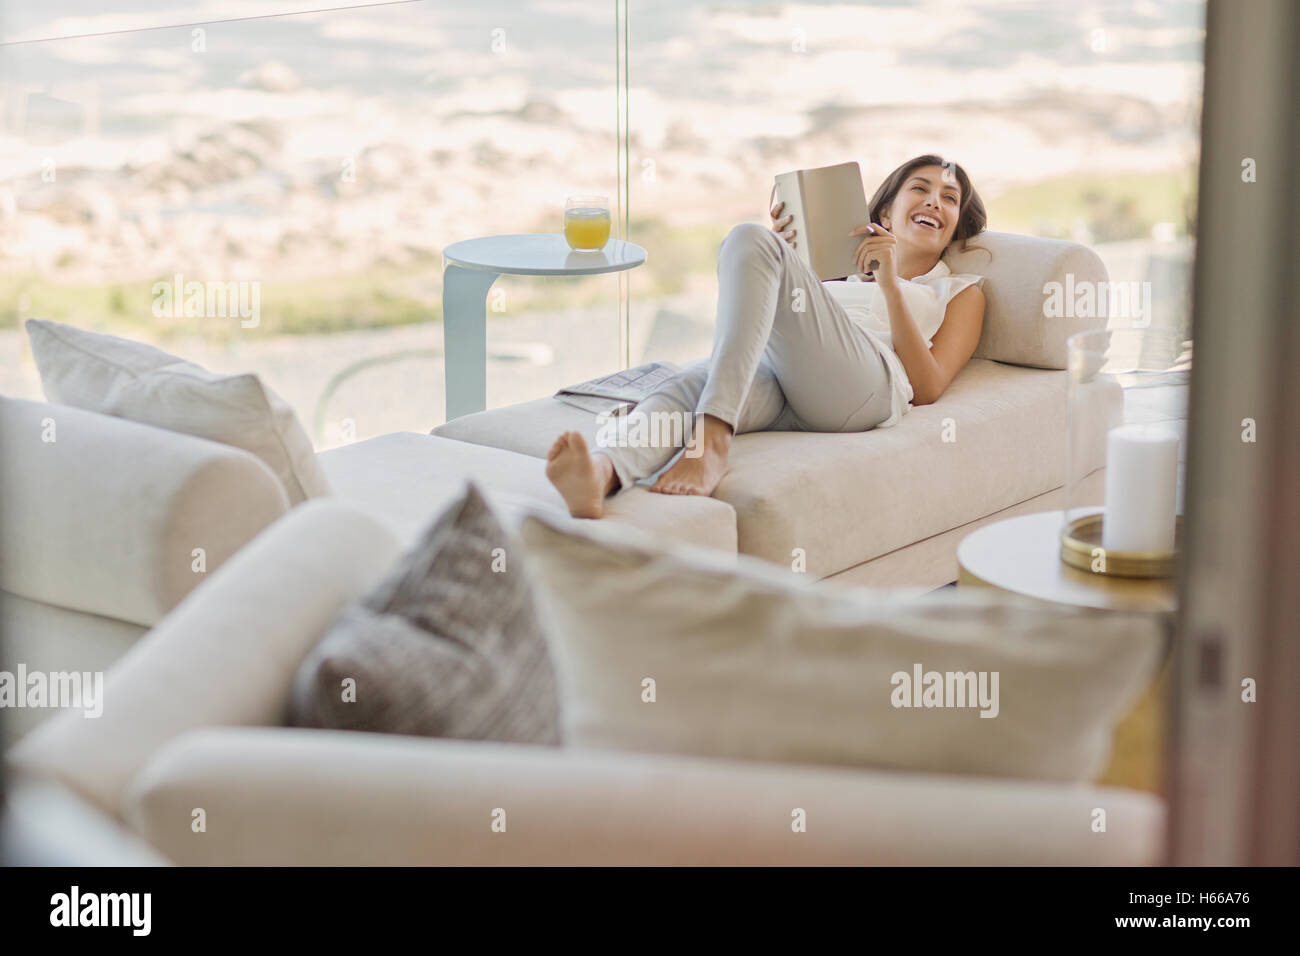 Smiling woman reading book relaxing on chaise lounge Stock Photo